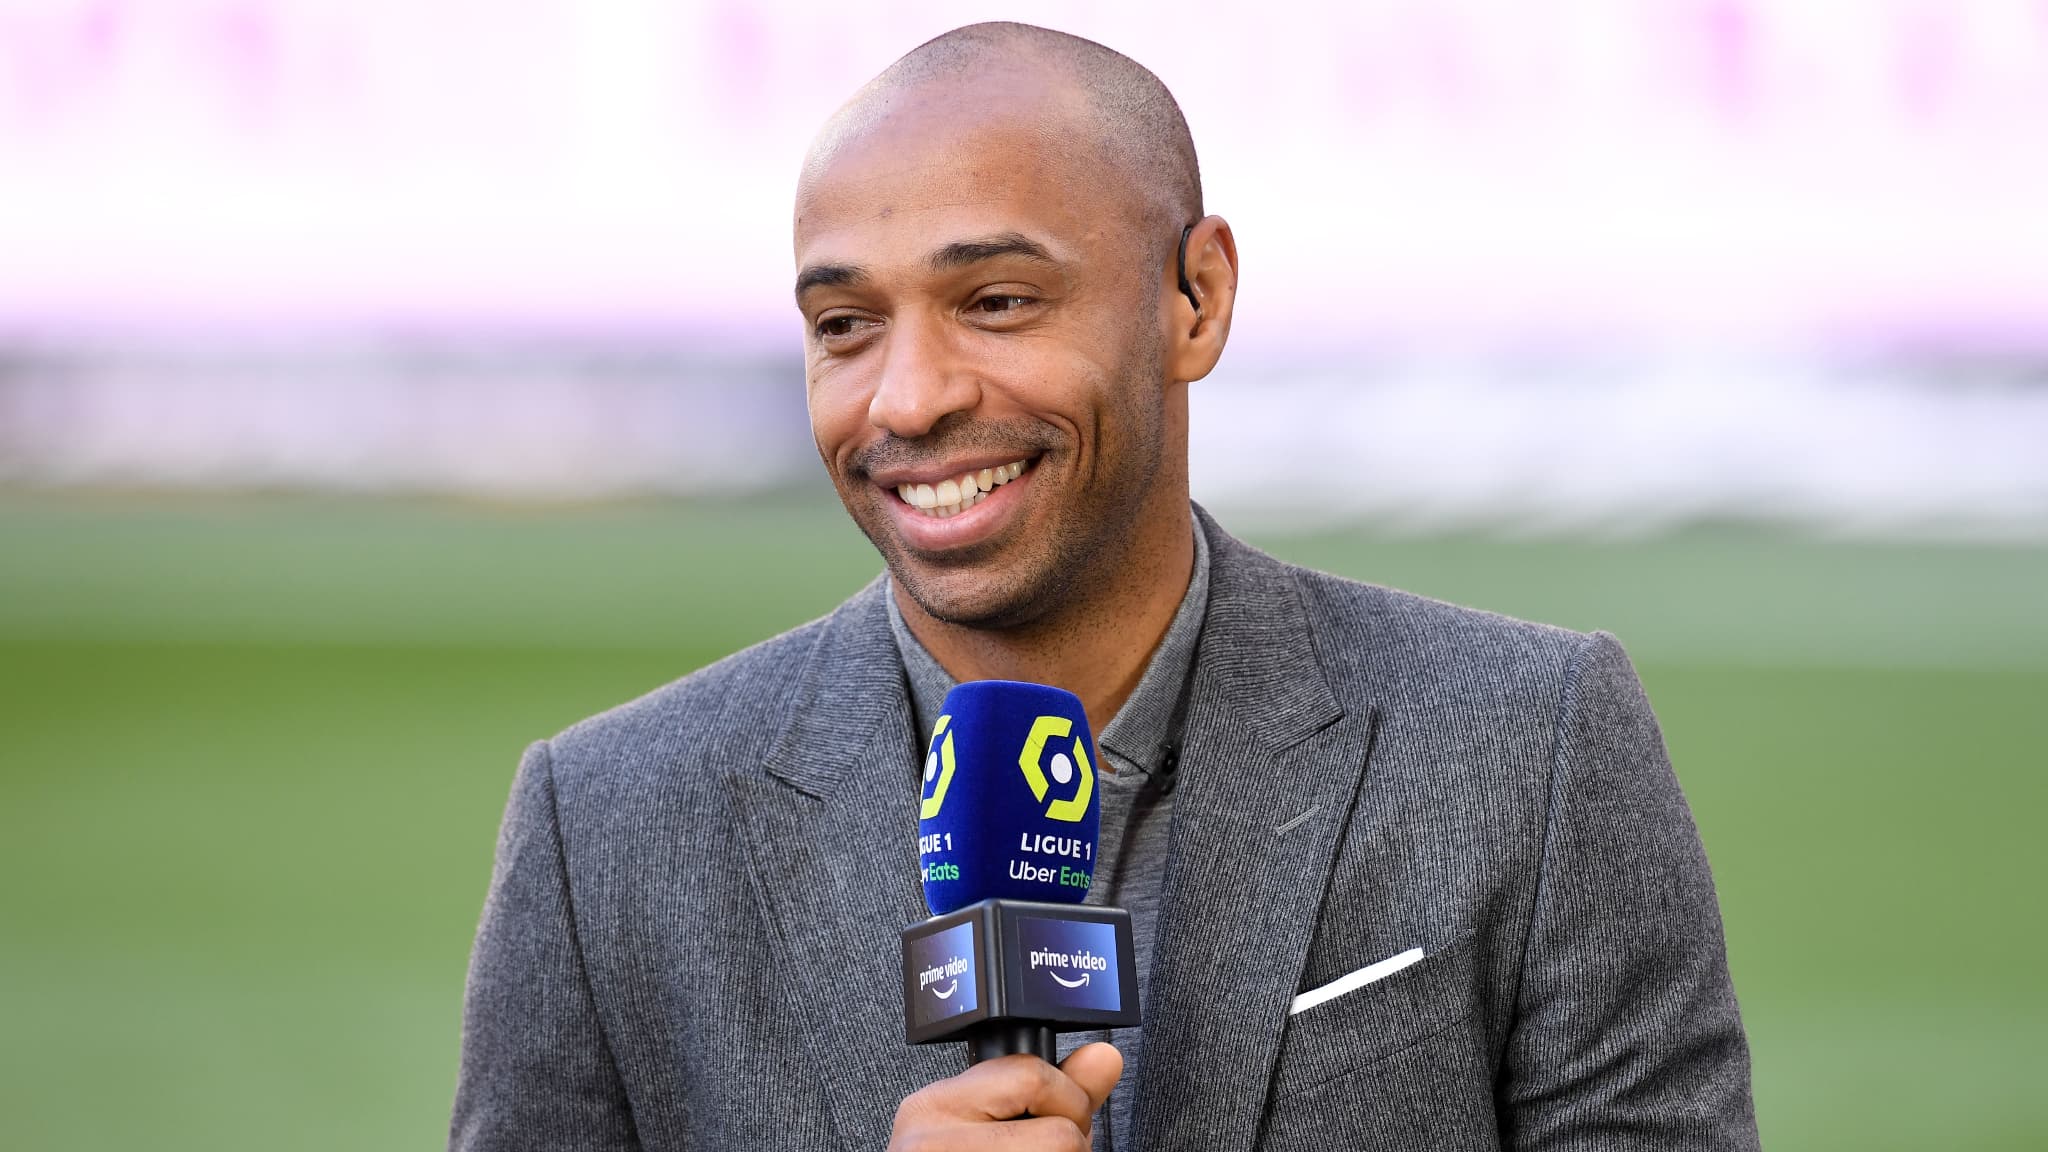 thierry henry 1131762